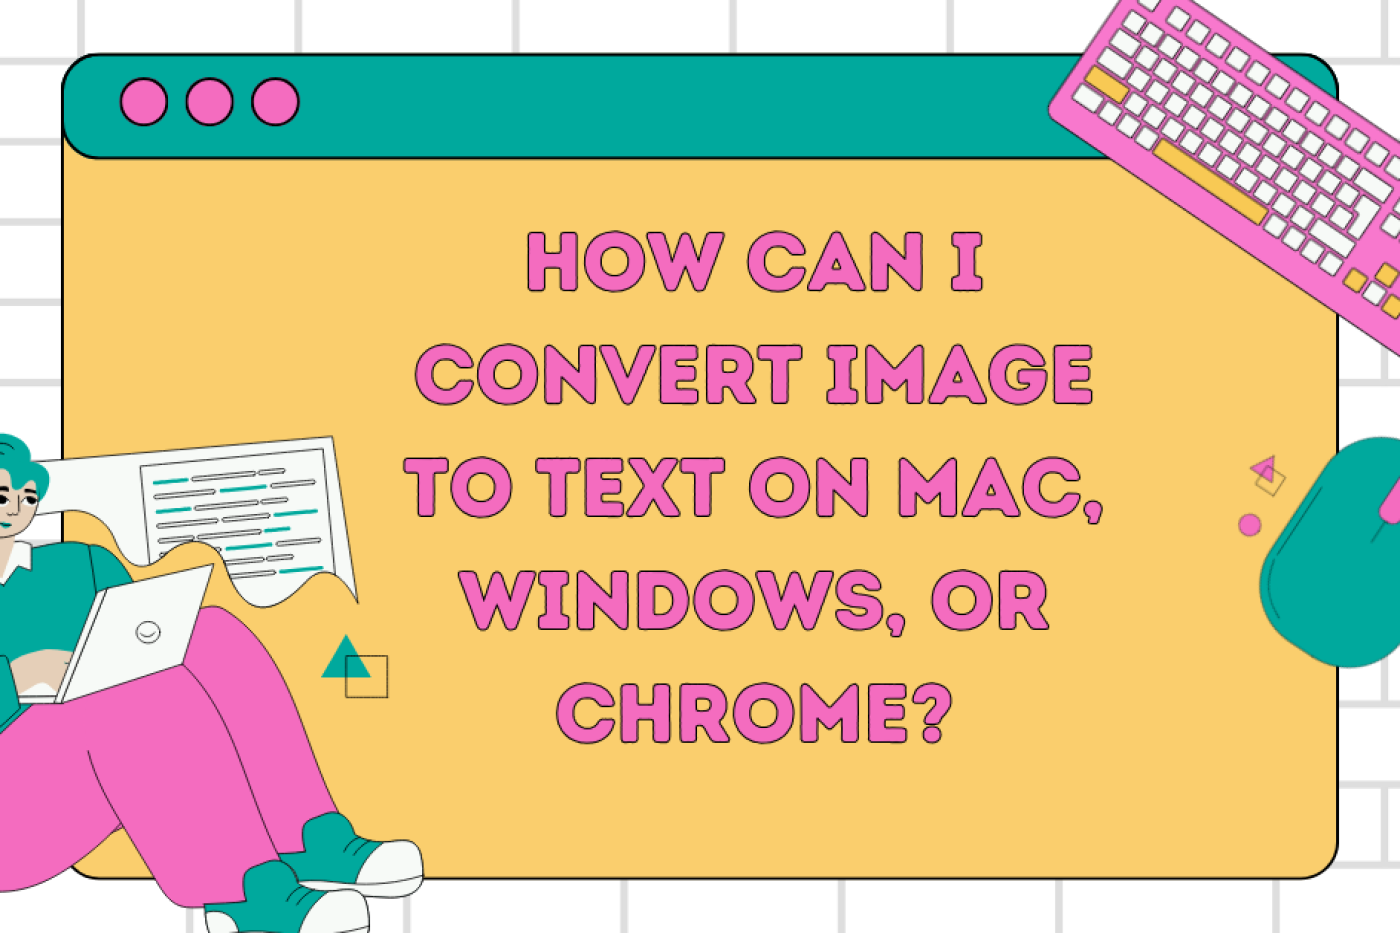 How Can I Convert Image to Text on Mac, Windows, or Chrome